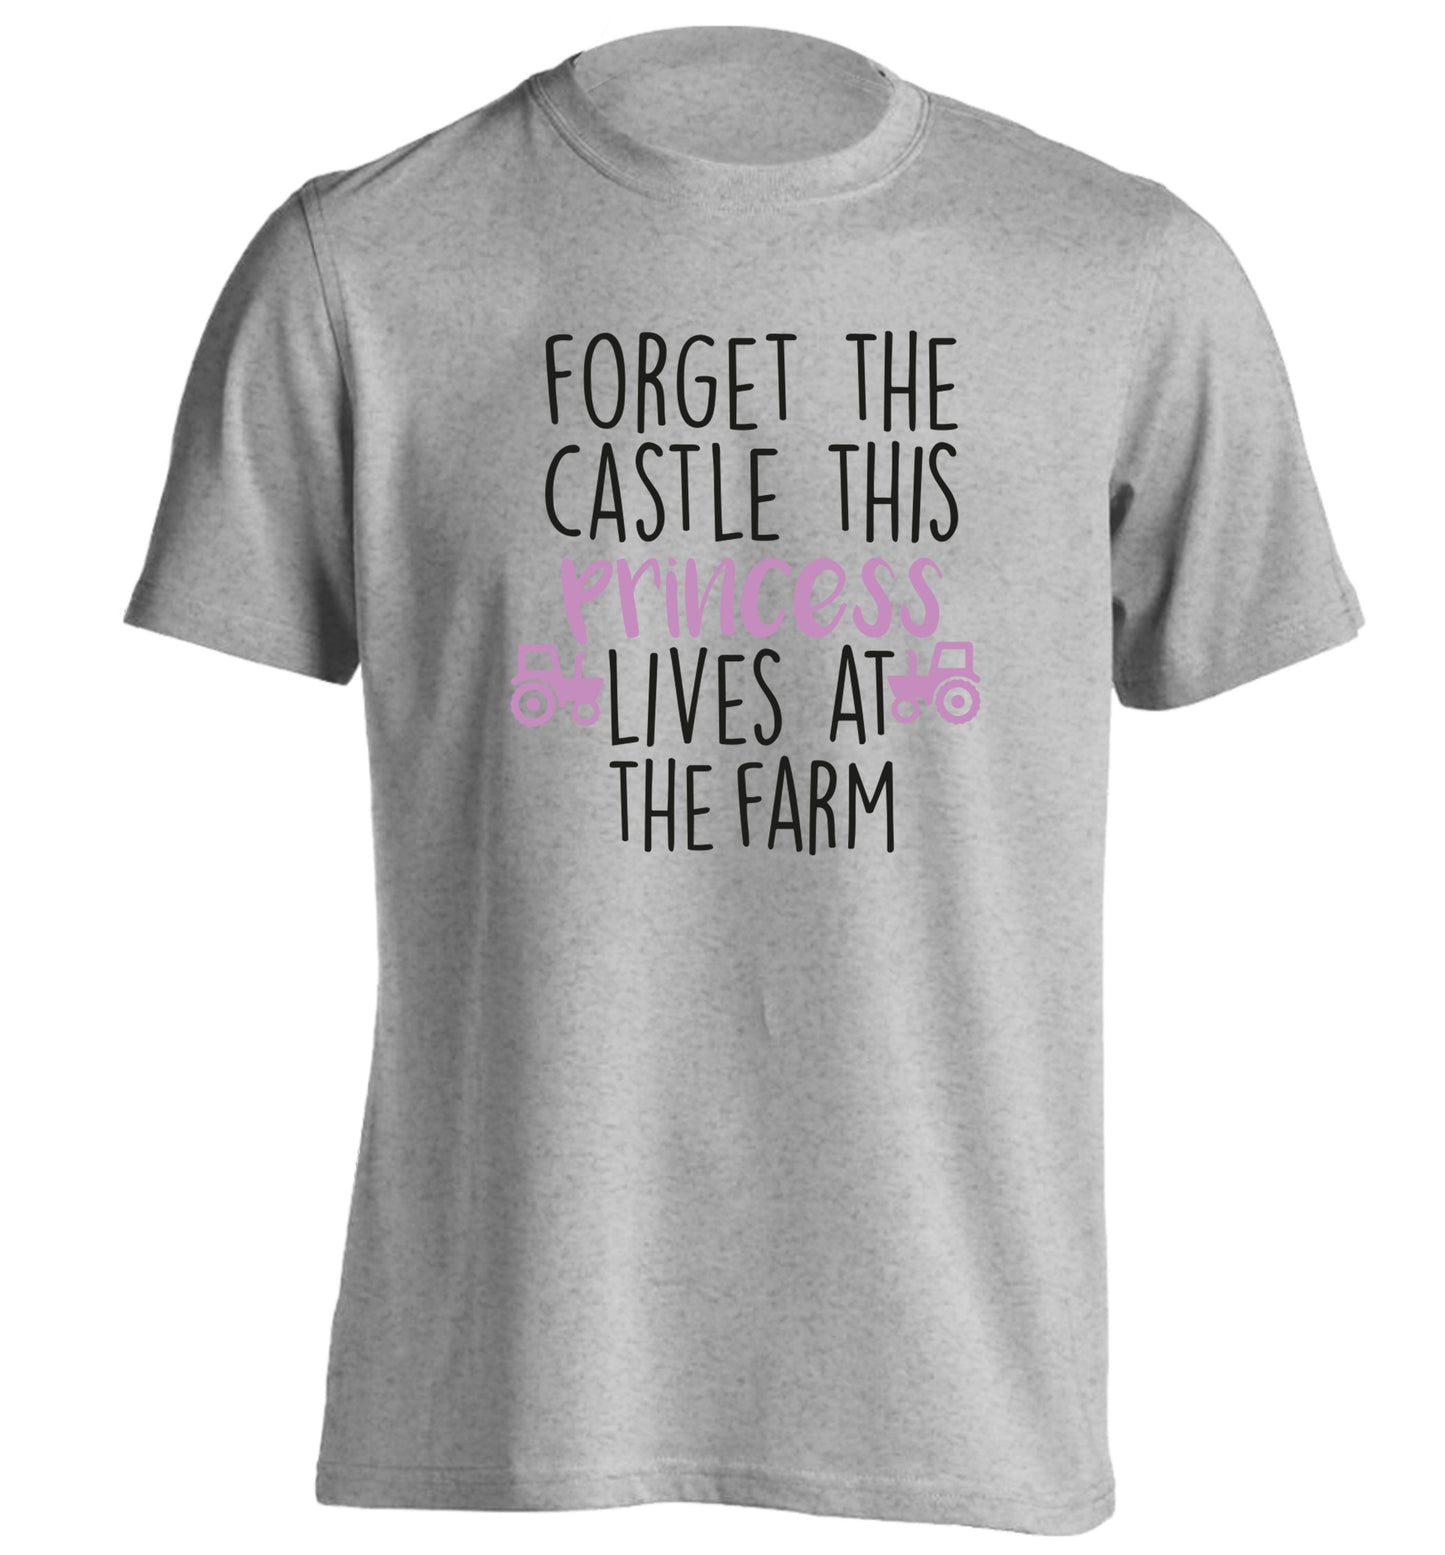 Forget the castle this princess lives at the farm adults unisex grey Tshirt 2XL